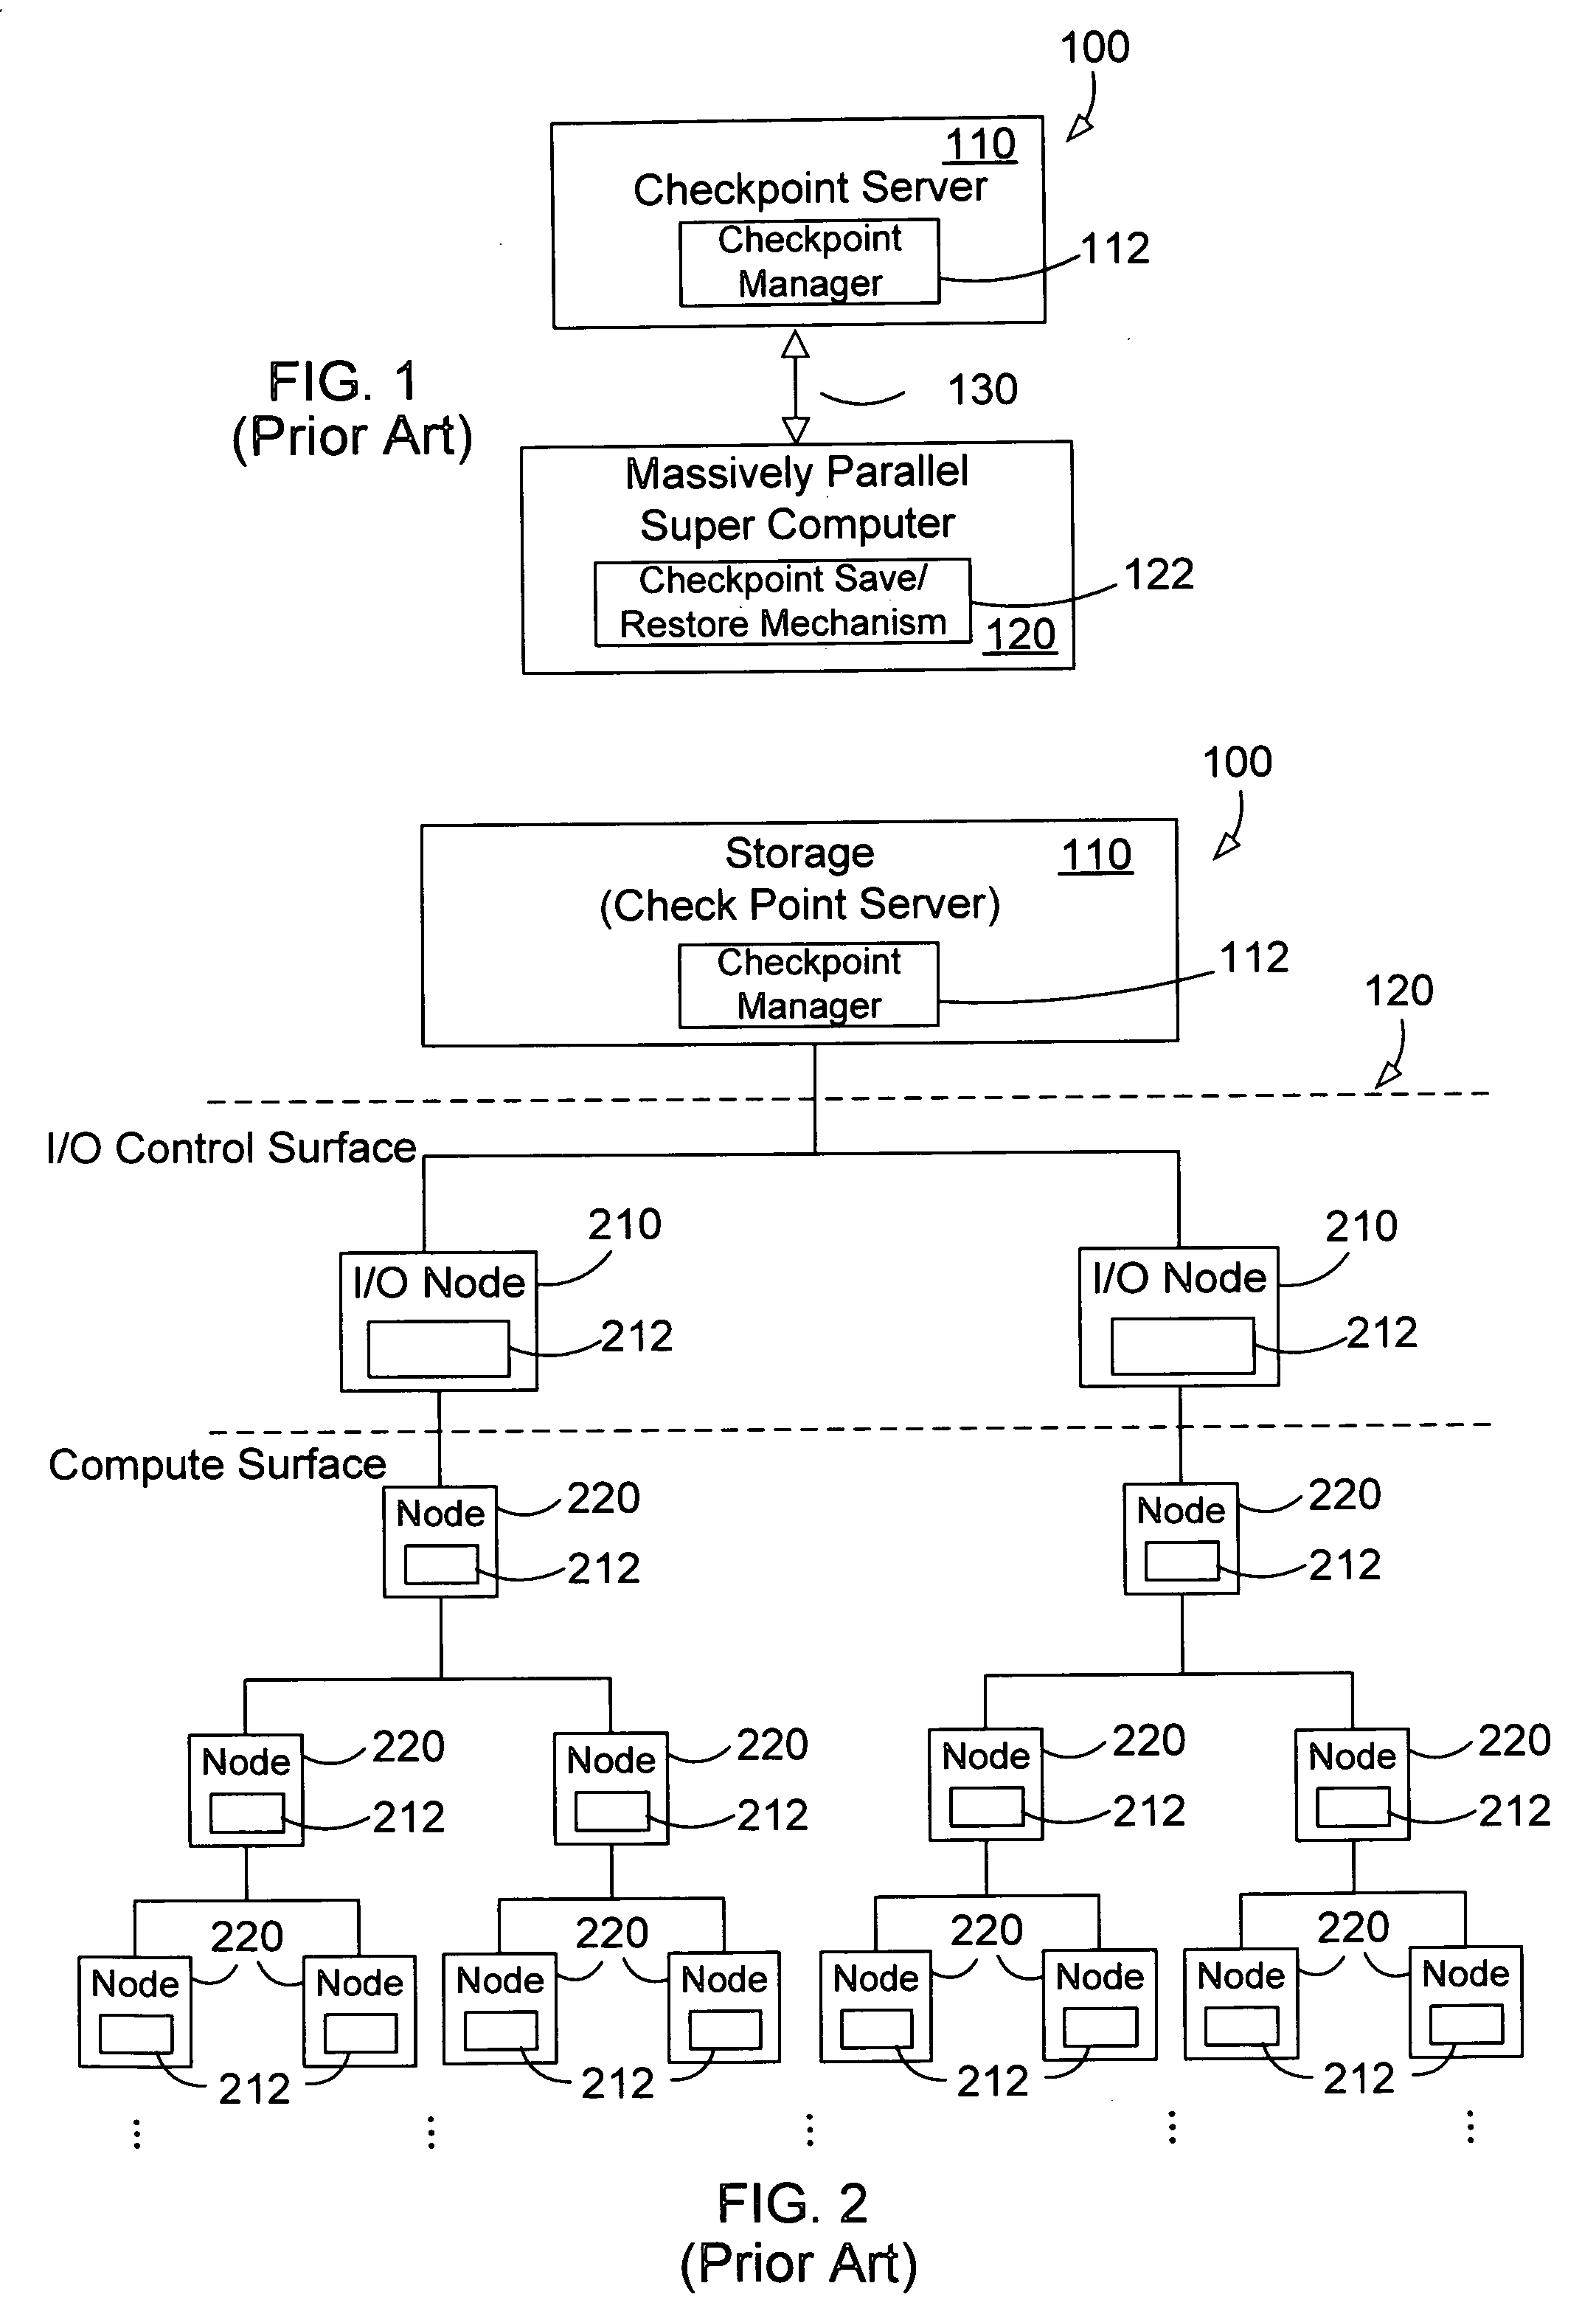 Method and apparatus for template based parallel checkpointing